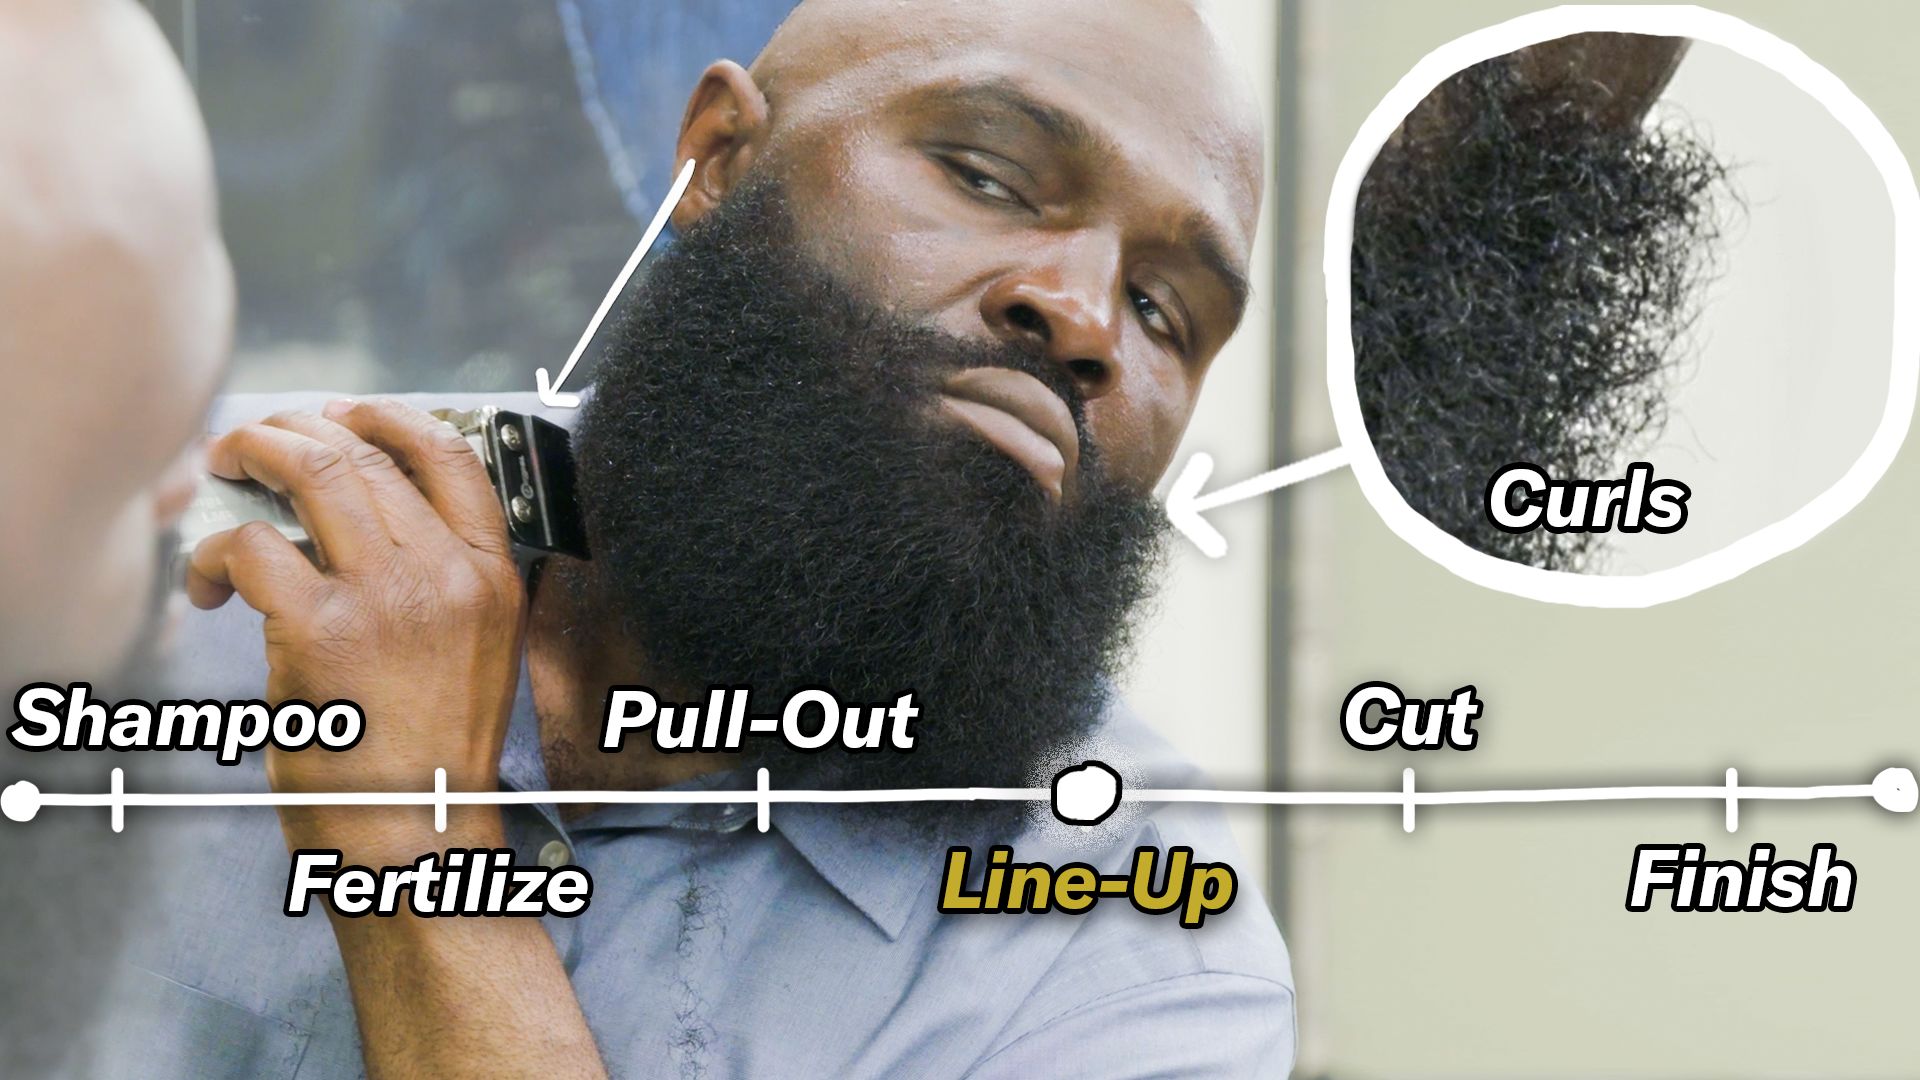 Watch How to Shape Up Your Curly Beard (6 Step Tutorial) | Grooming | GQ